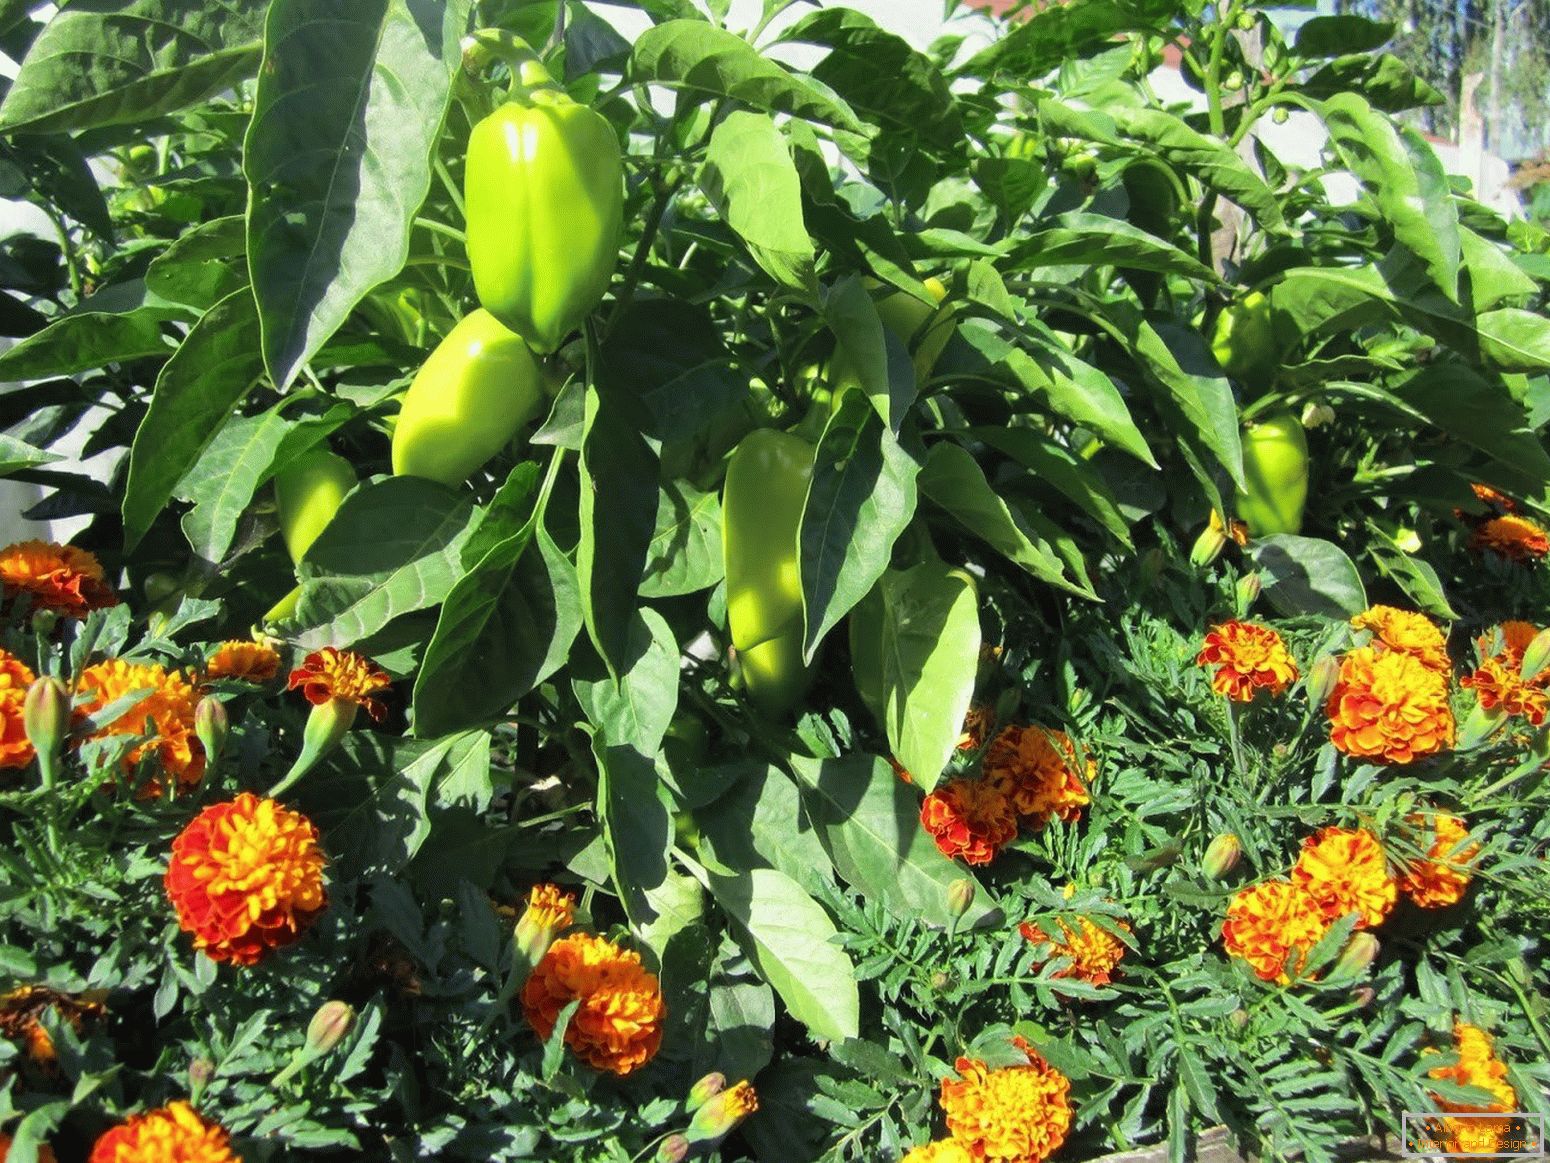 Marigolds protect plants from pests